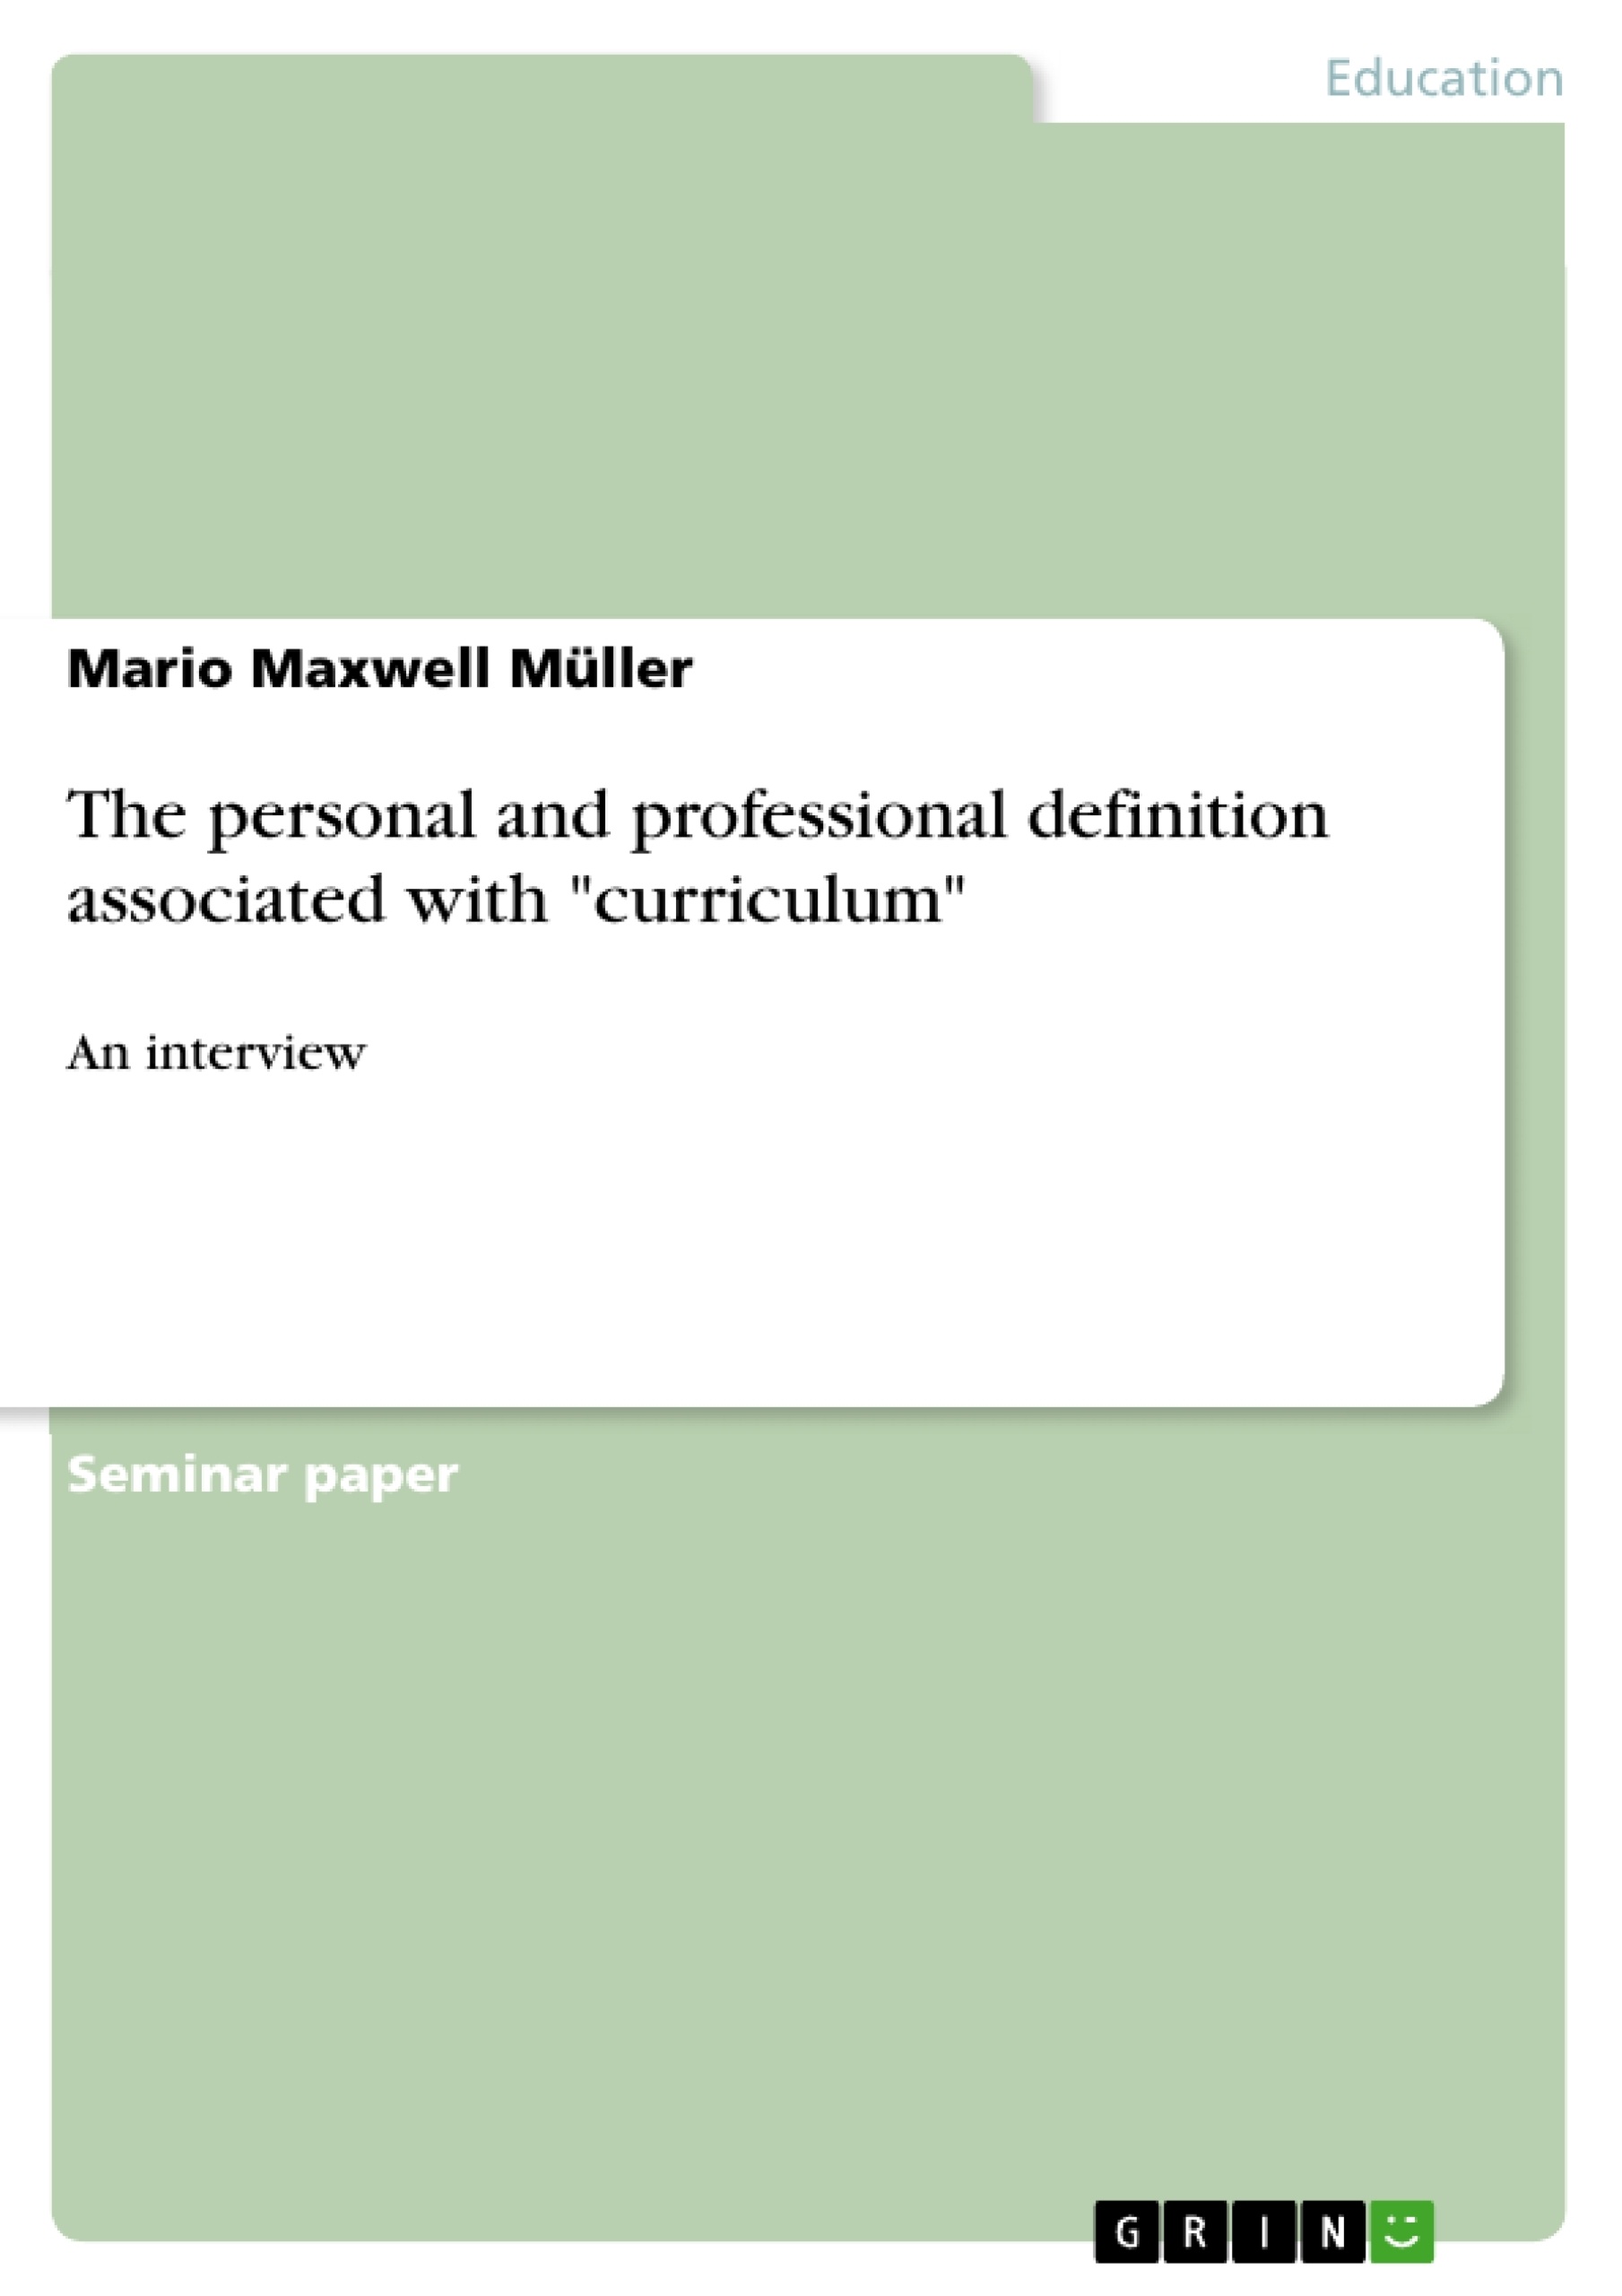 Title: The personal and professional definition associated with "curriculum"